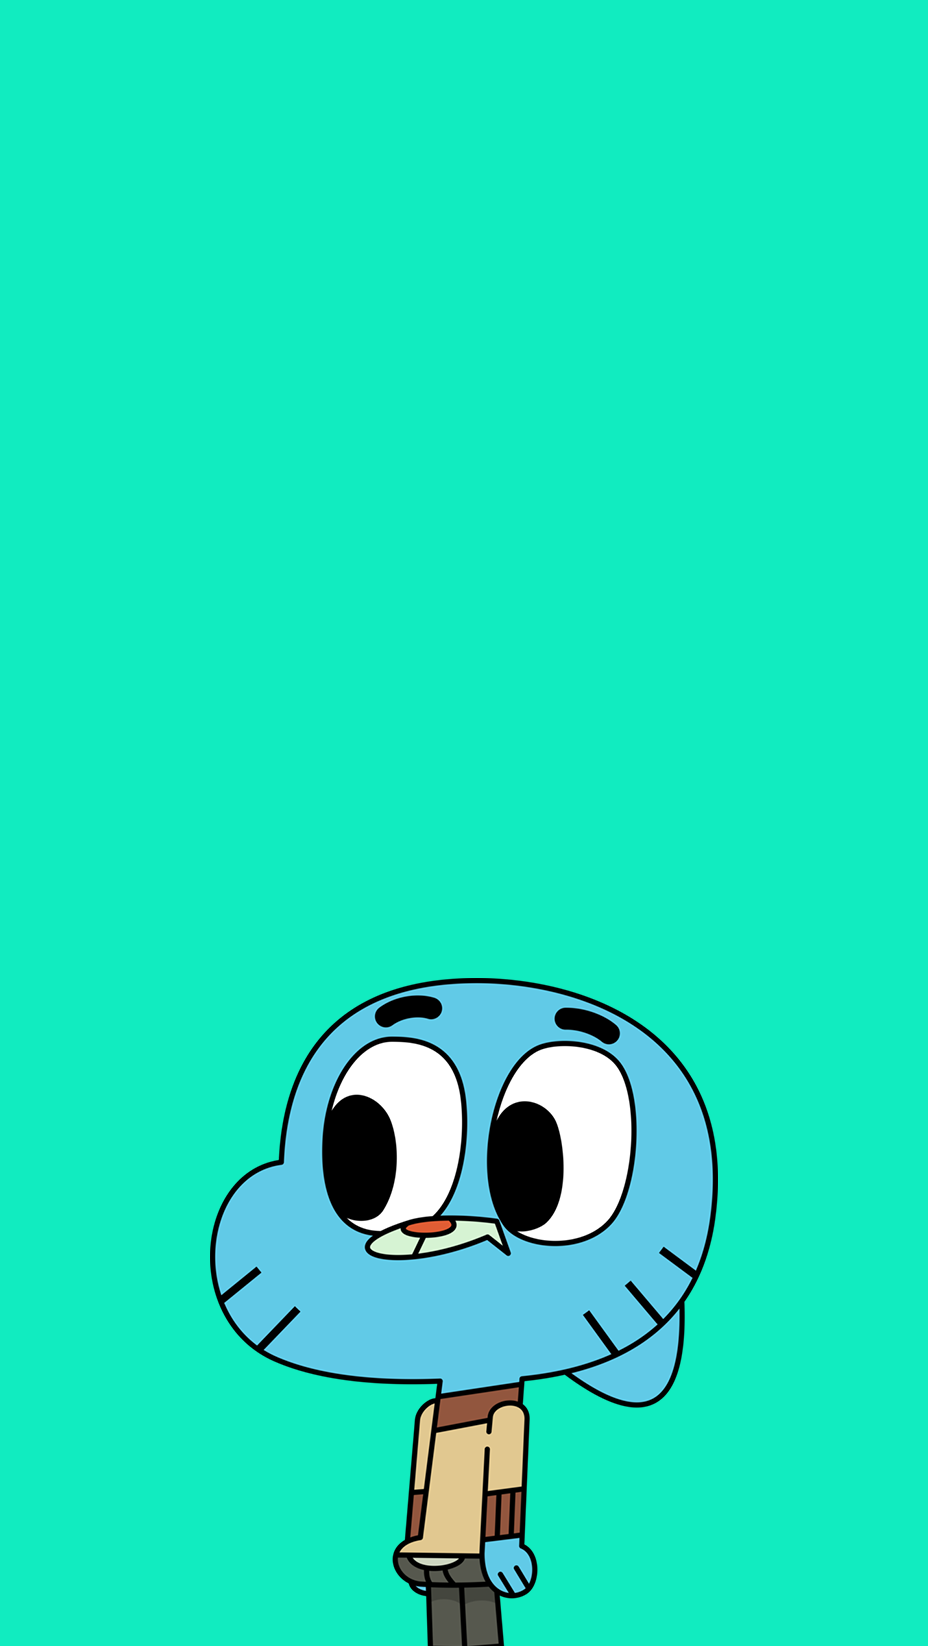 Gumball and Penny wallpaper  The amazing world of gumball, Cartoon  wallpaper iphone, Gumball